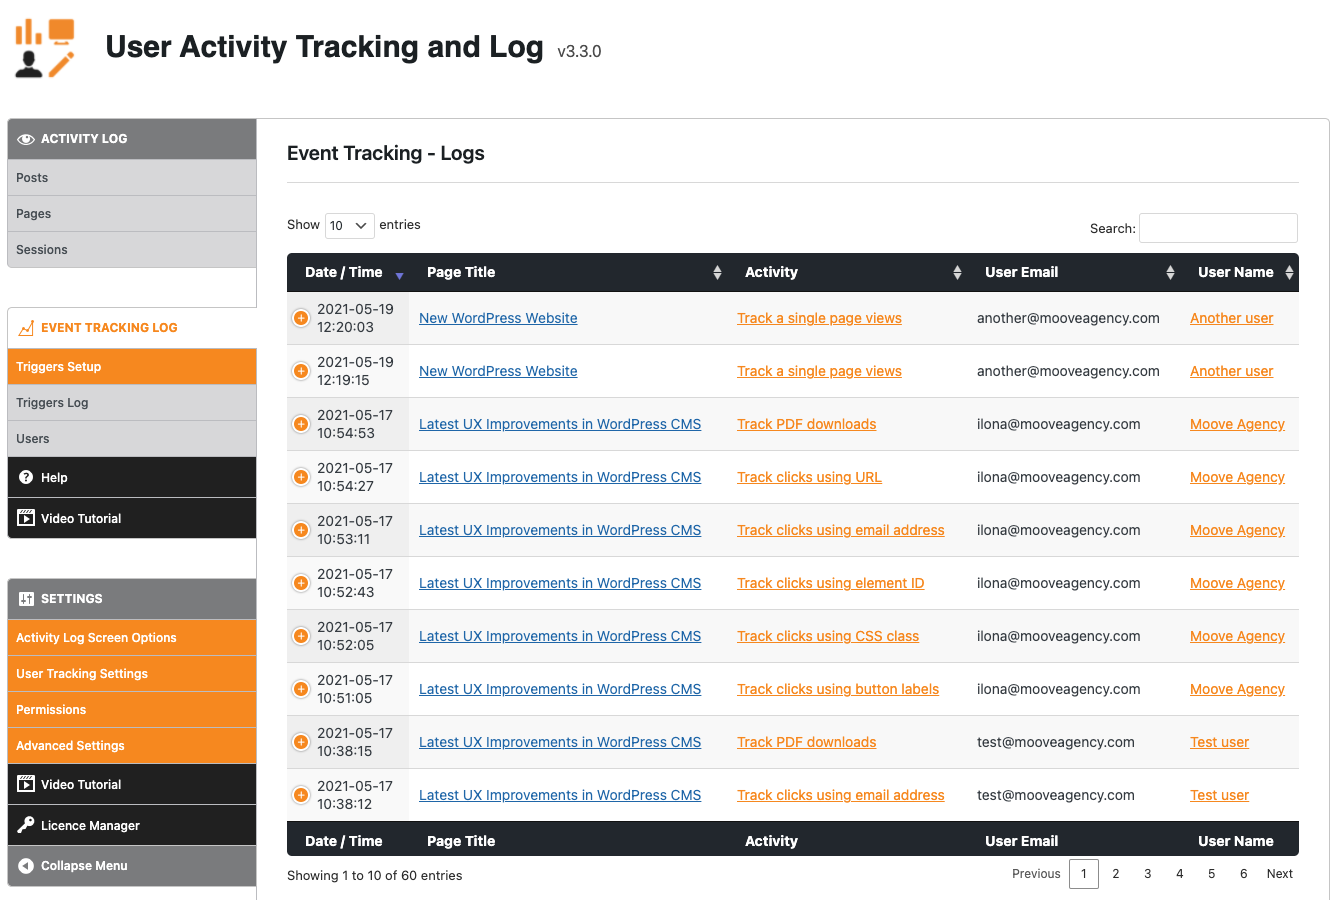 User Activity Tracking and Log - Event Tracking Log - Help